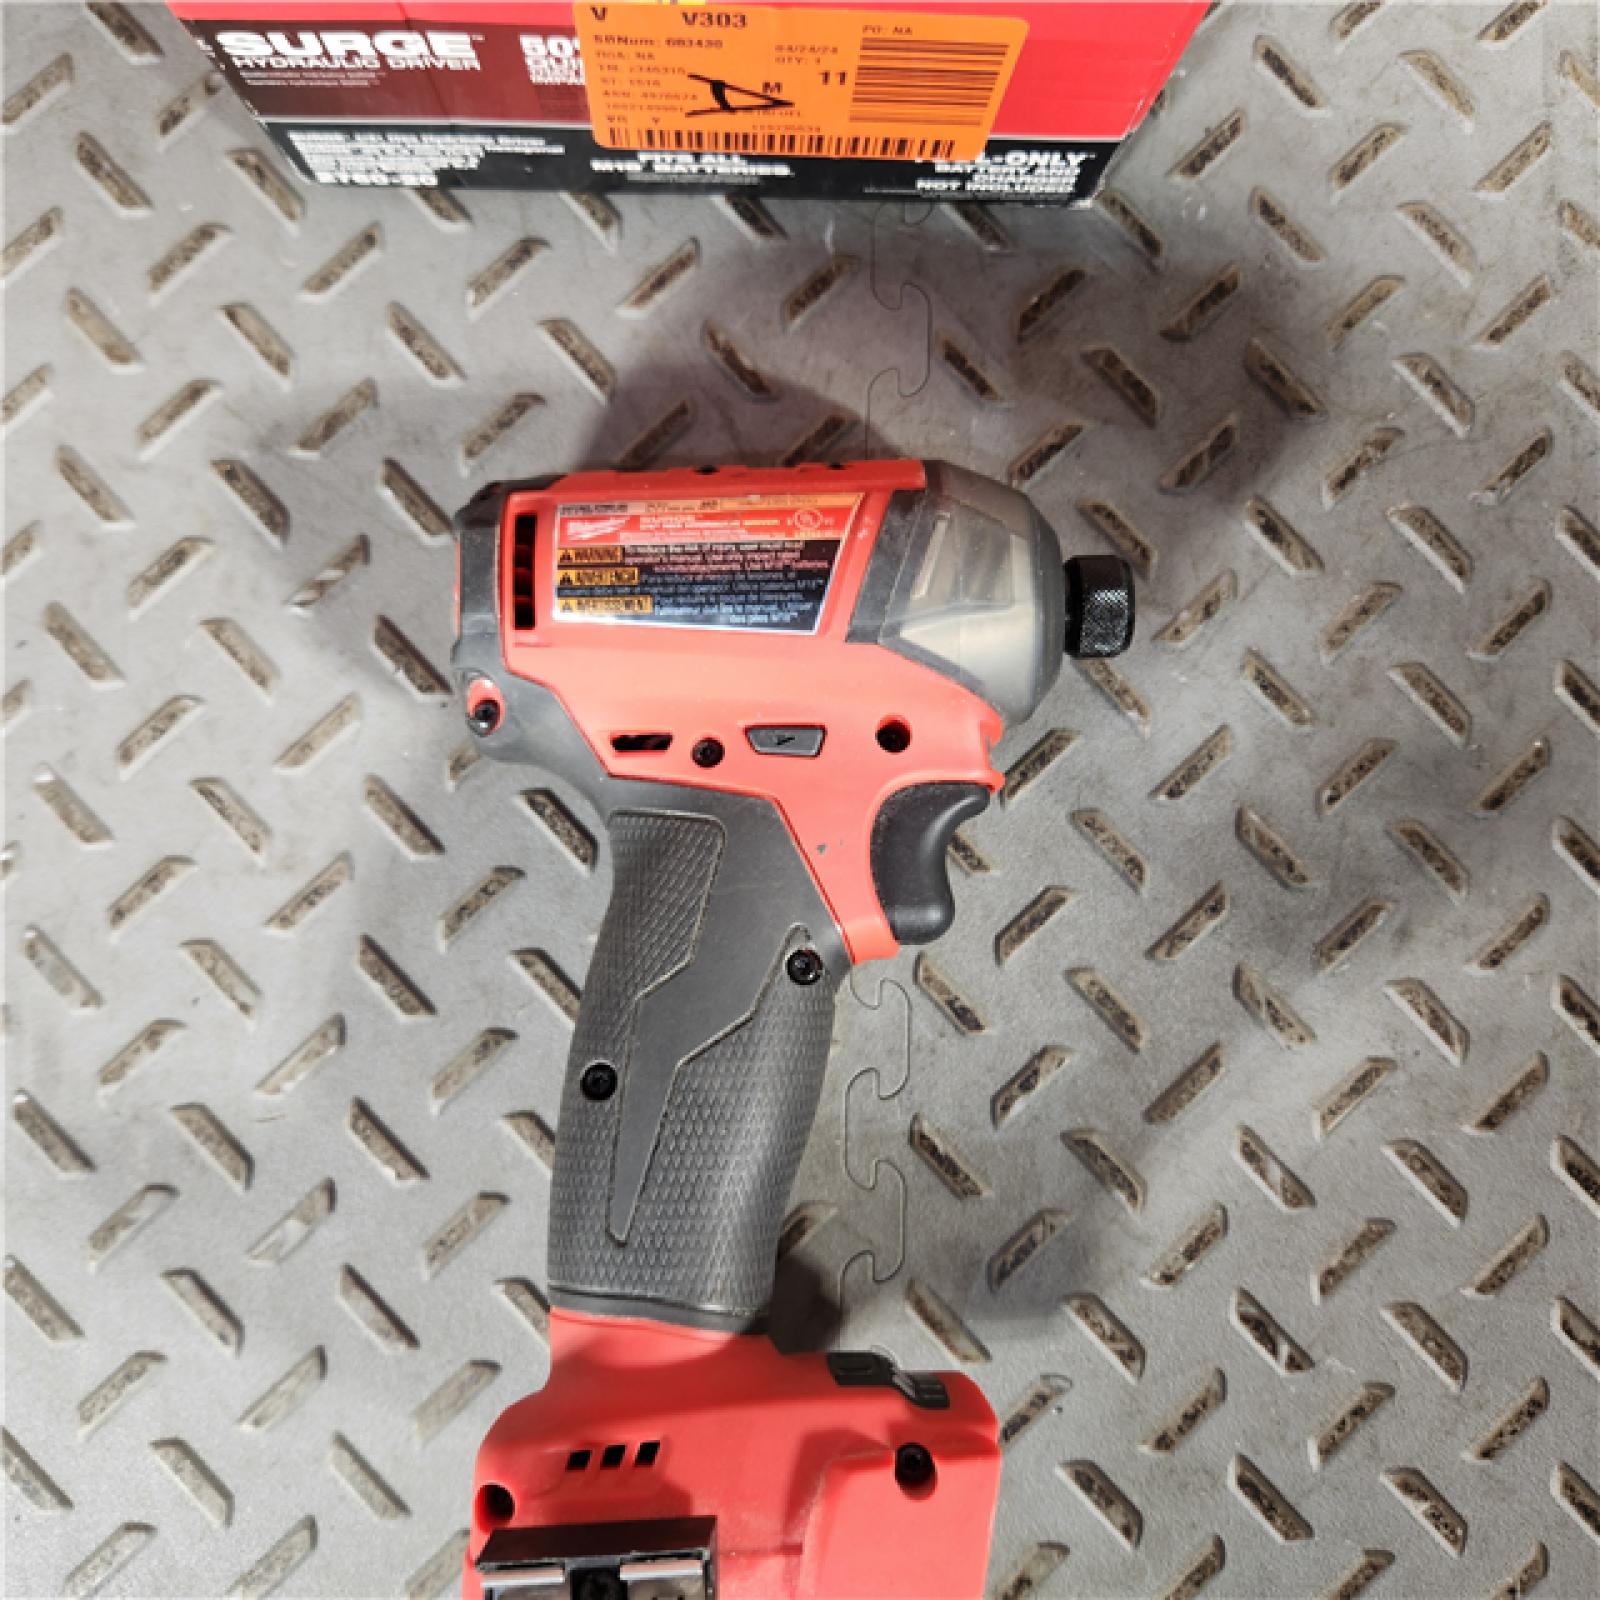 Houston location- AS-IS Milwaukee M18 FUEL SURGE 1/4 Hex Hydraulic Driver TOOL ONLY